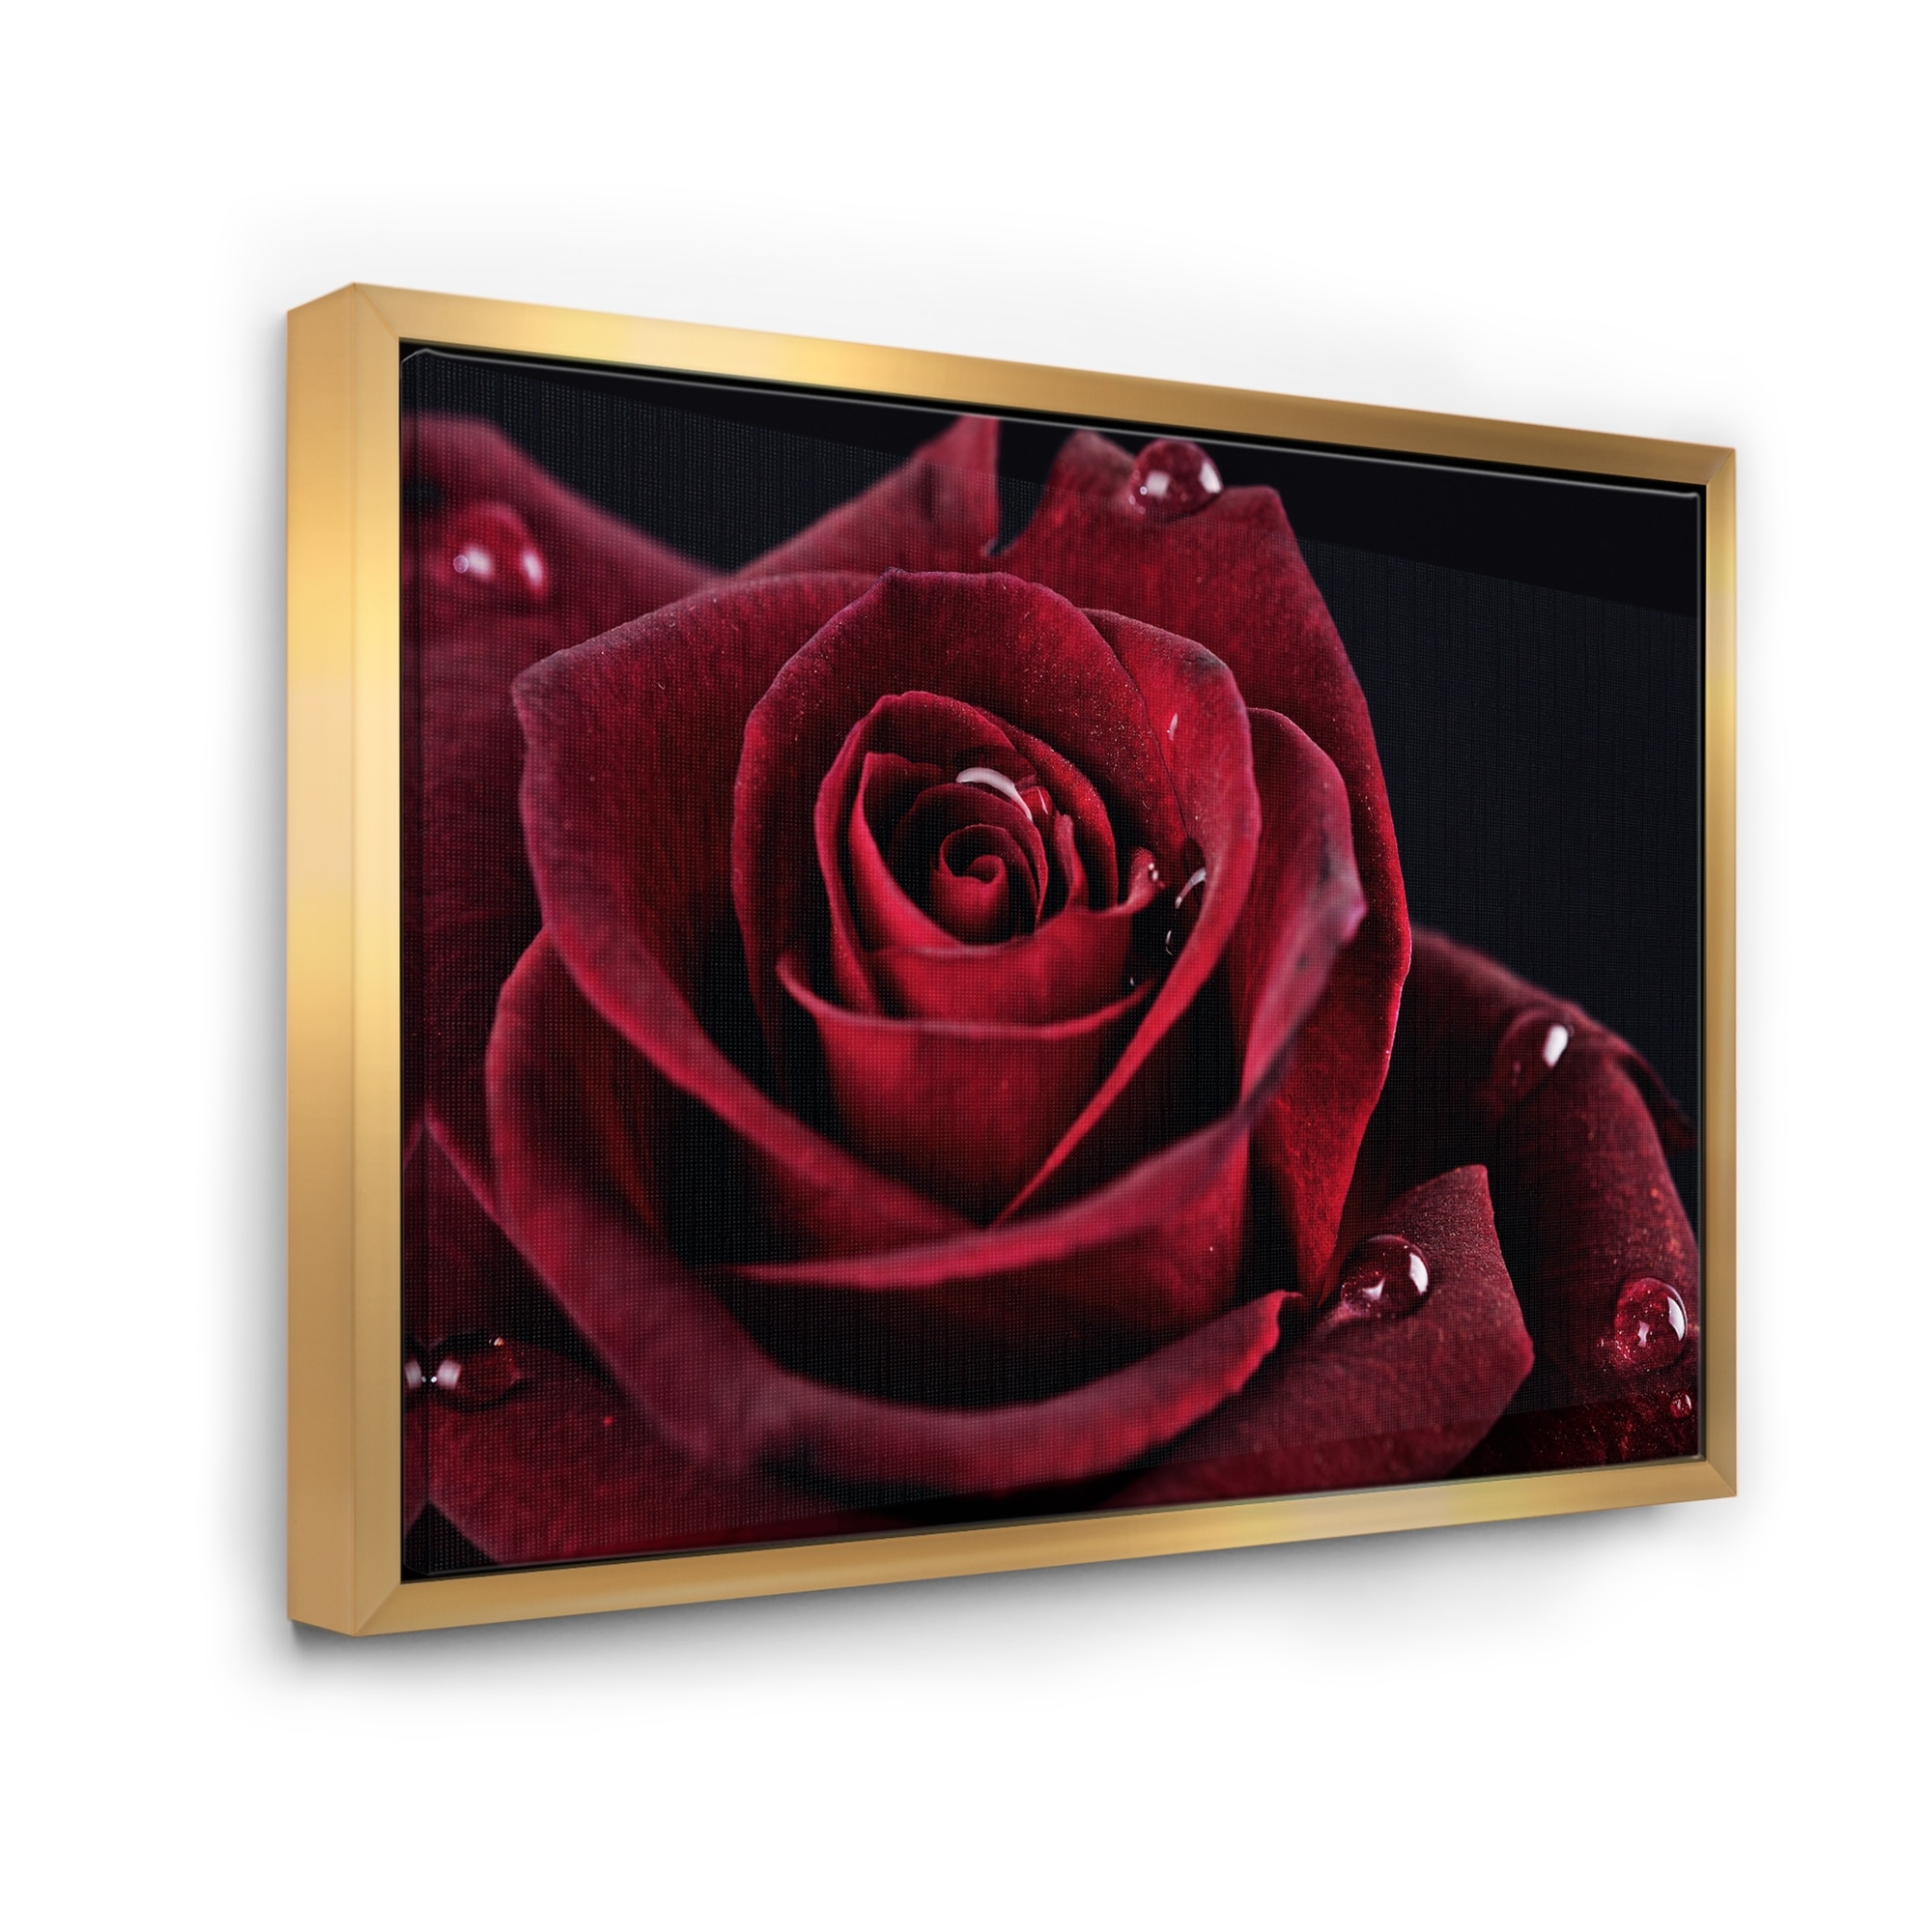 FLOWER In The Rain CANVAS PICTURE POSTER PRINT UNFRAMED #1006 RED ROSE 